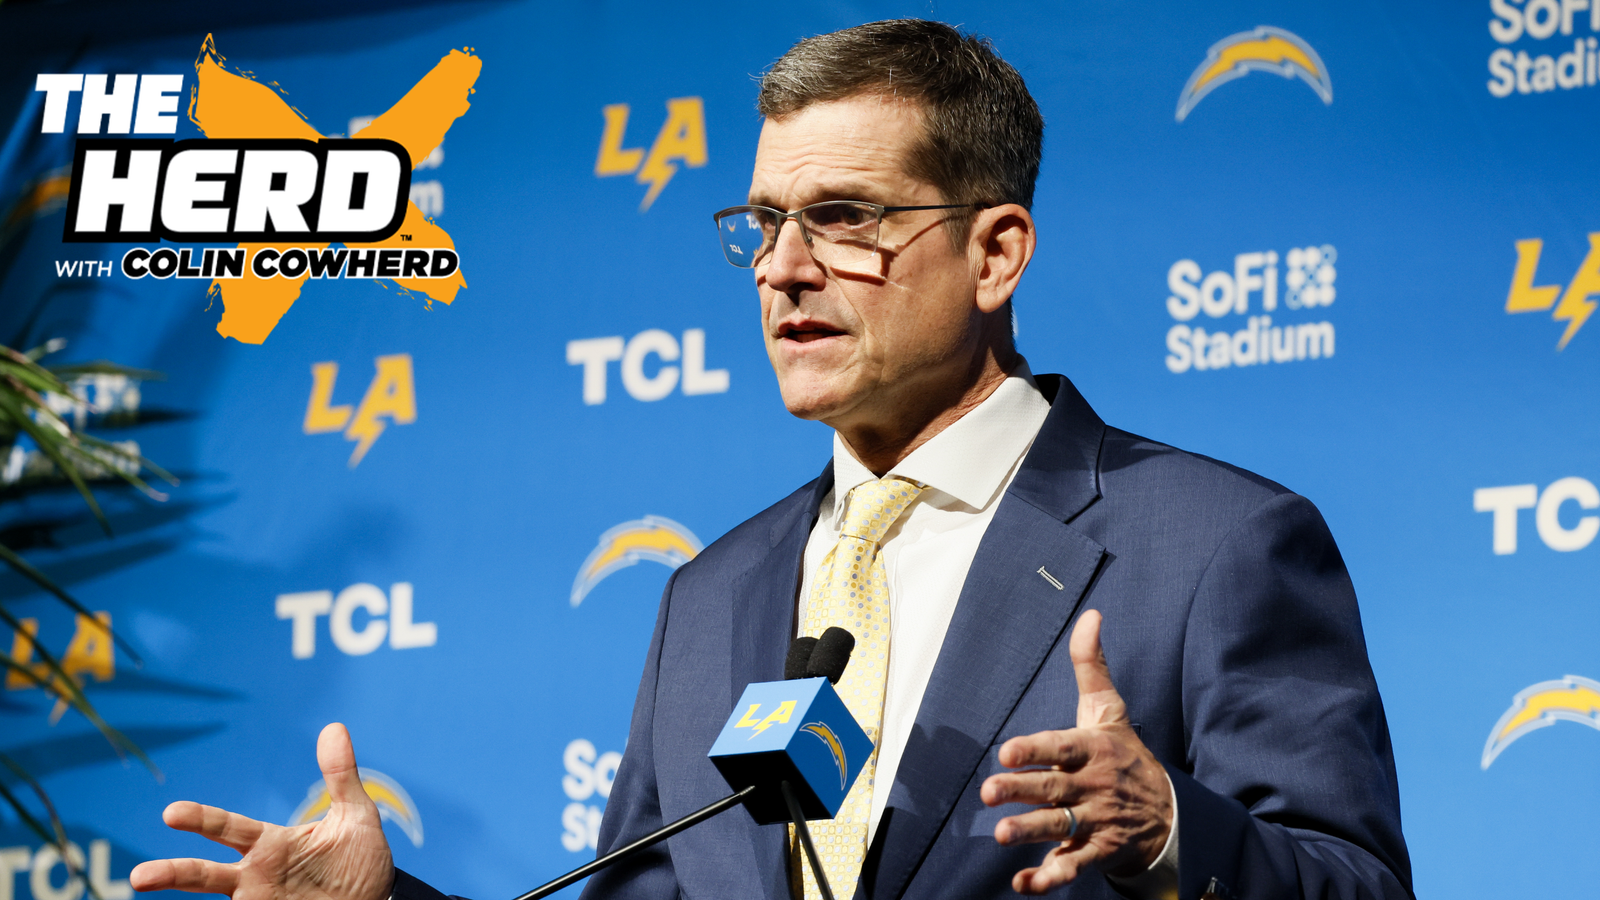 What are realistic expectations for Harbaugh in L.A.?